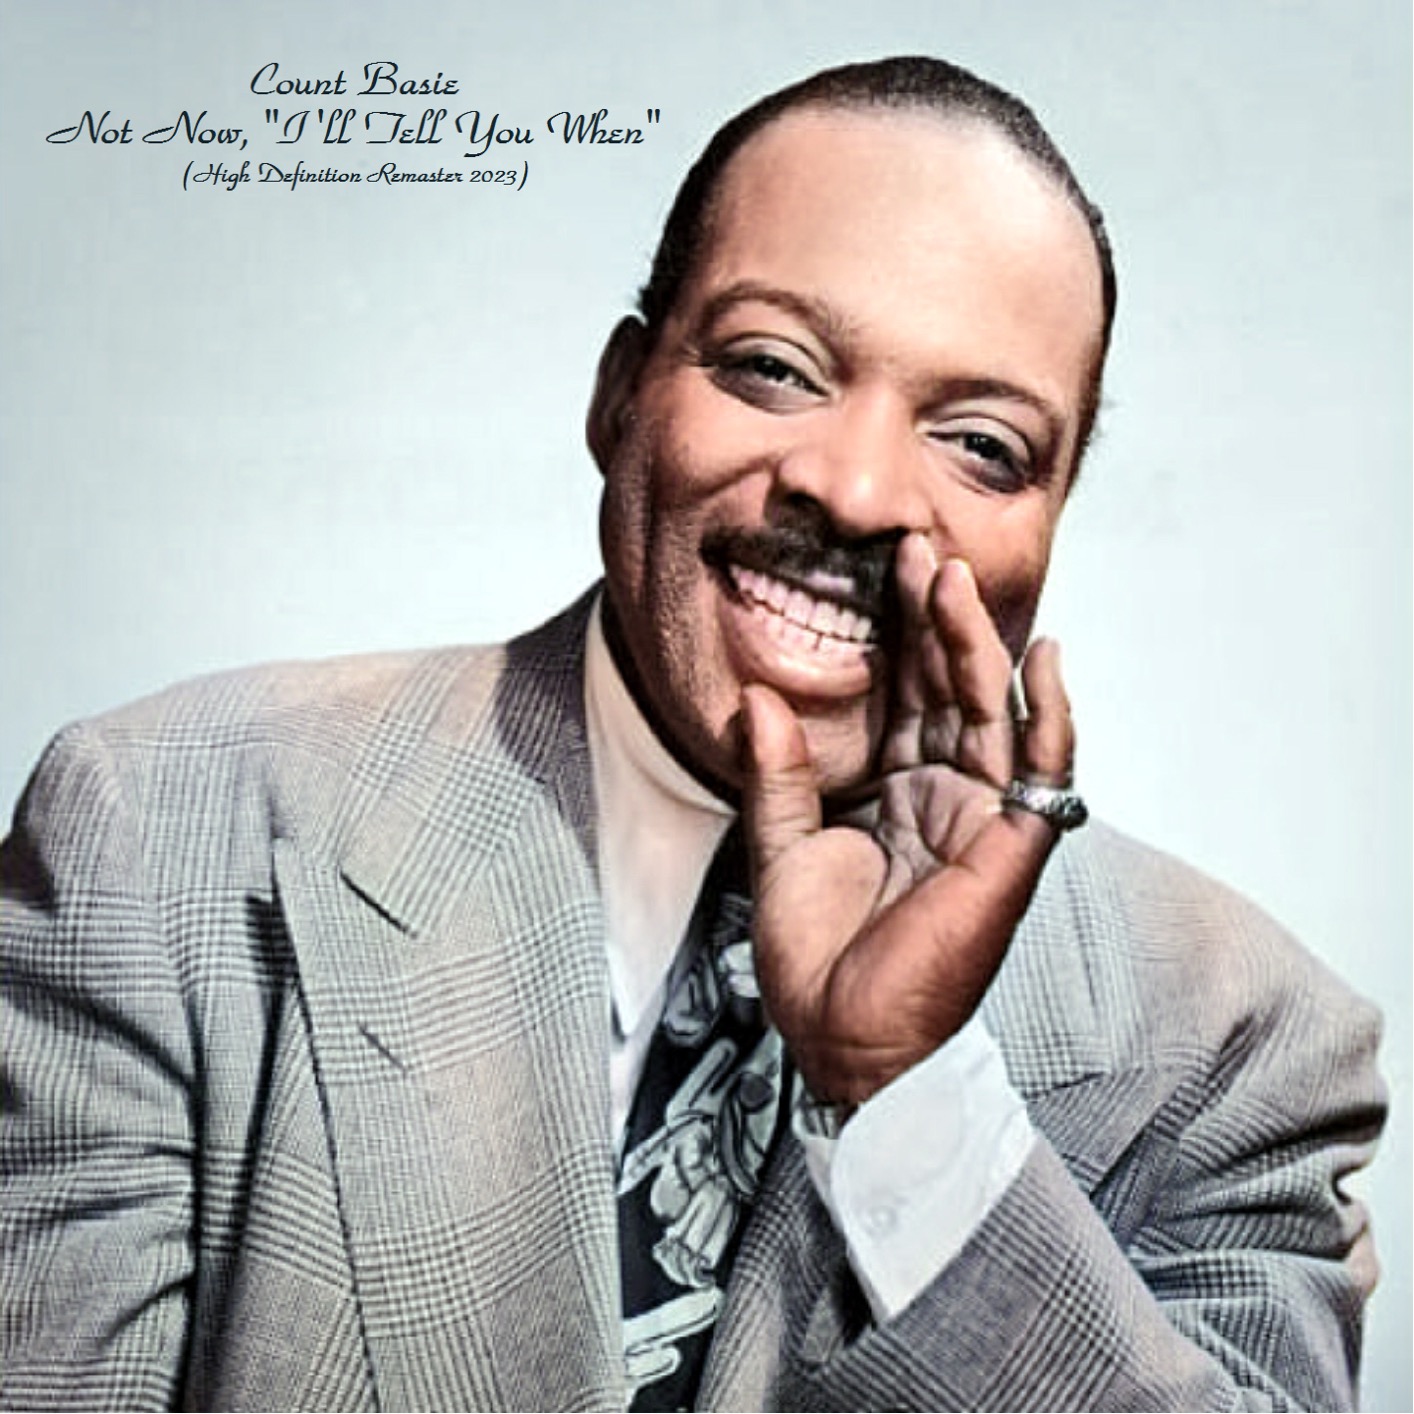 Count Basie - Not Now, "I'll Tell You When" (High Definition Remaster) (1960/2023) [FLAC 24bit/44,1kHz]